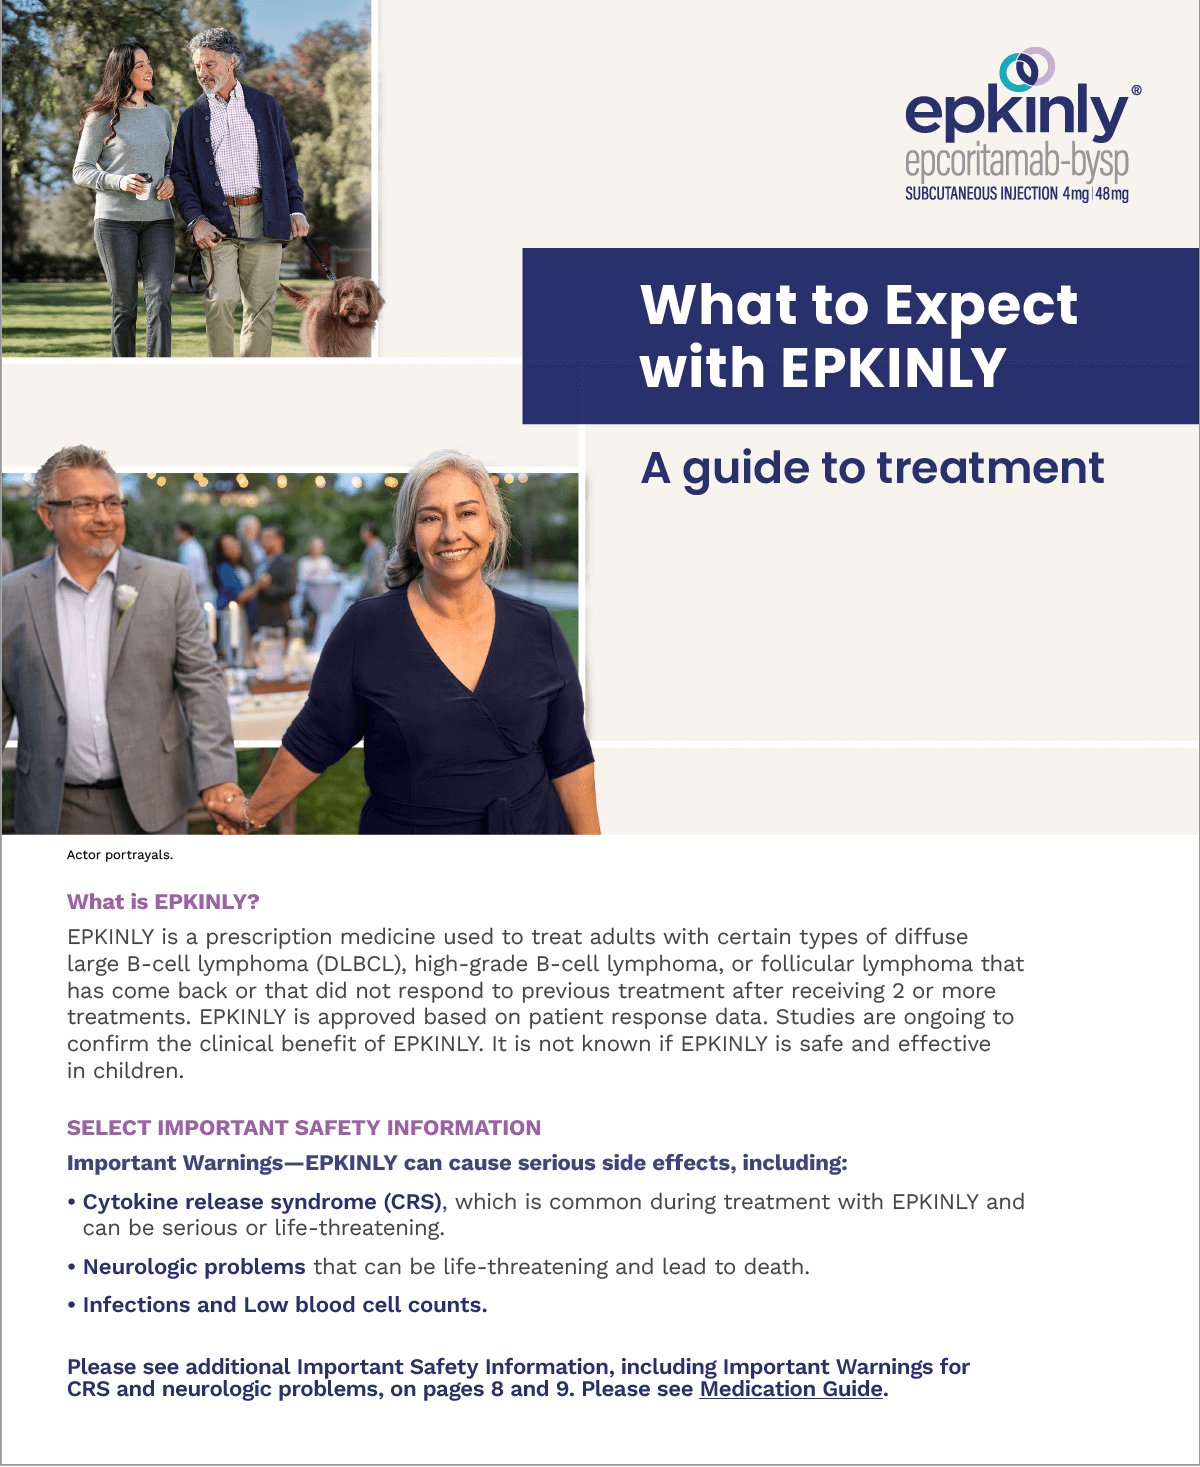 Download the EPKINLY® What to Expect Guide.